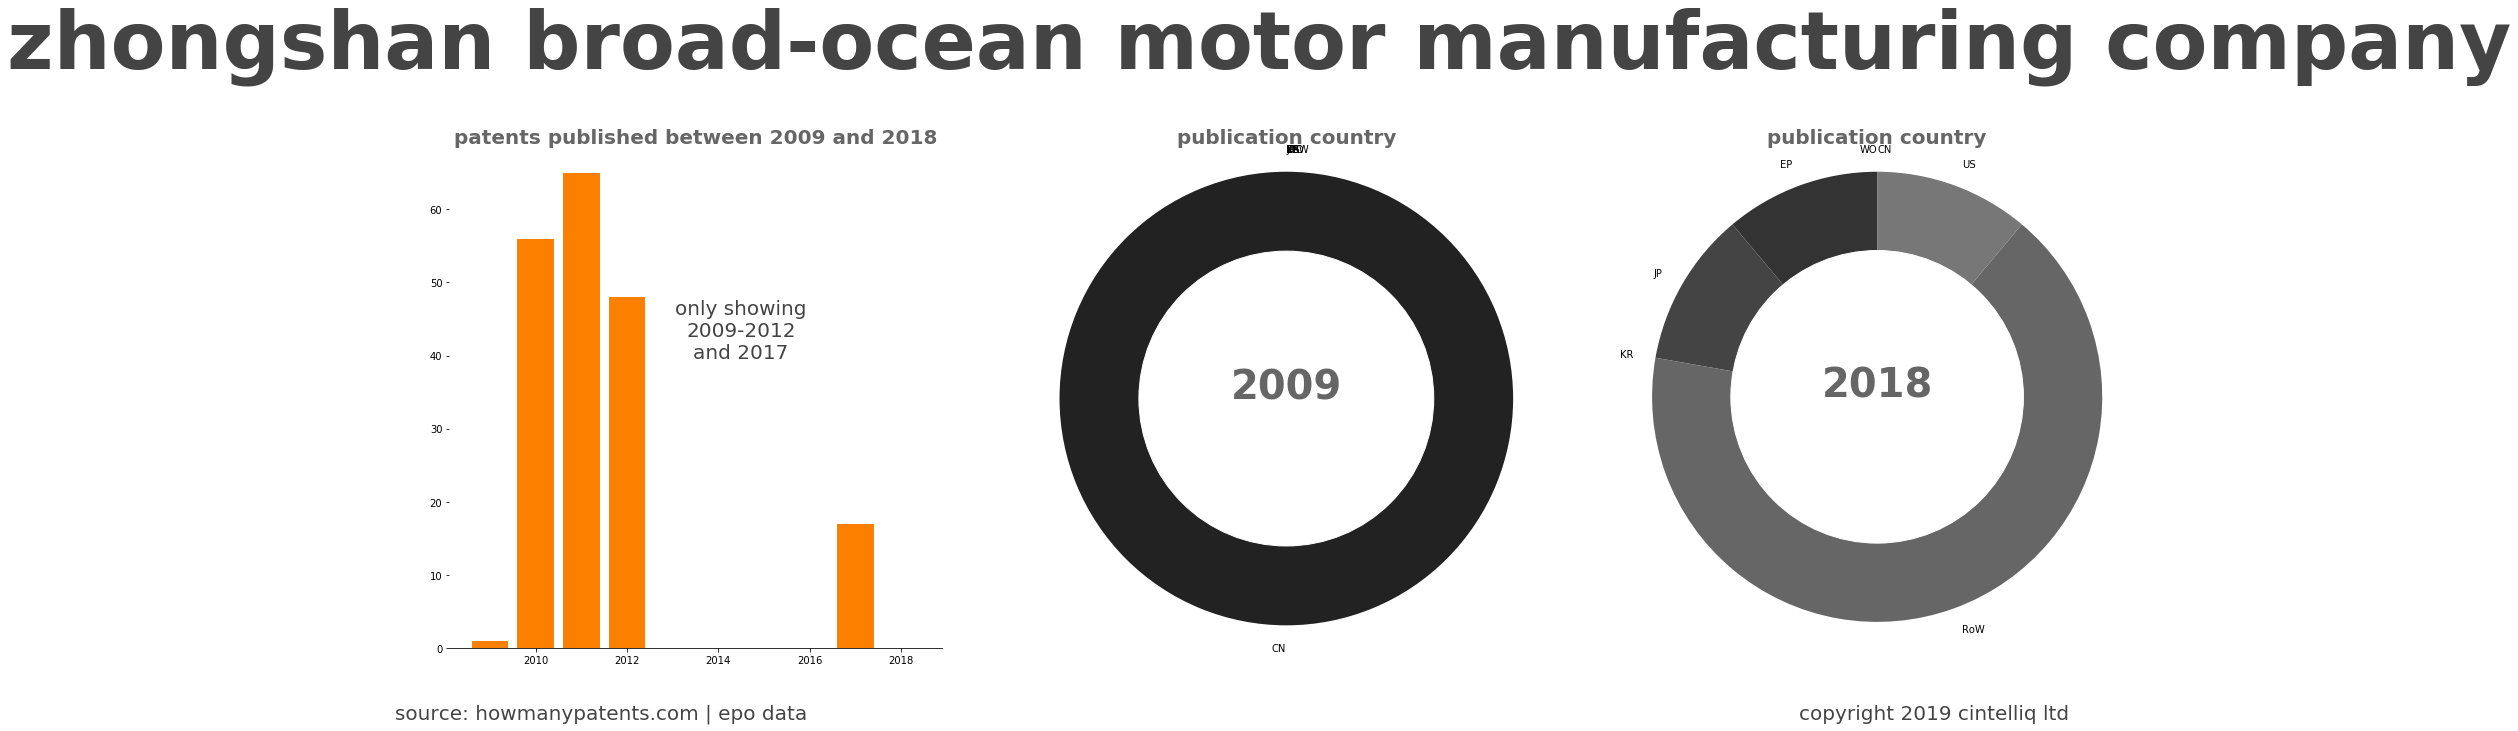 summary of patents for Zhongshan Broad-Ocean Motor Manufacturing Company